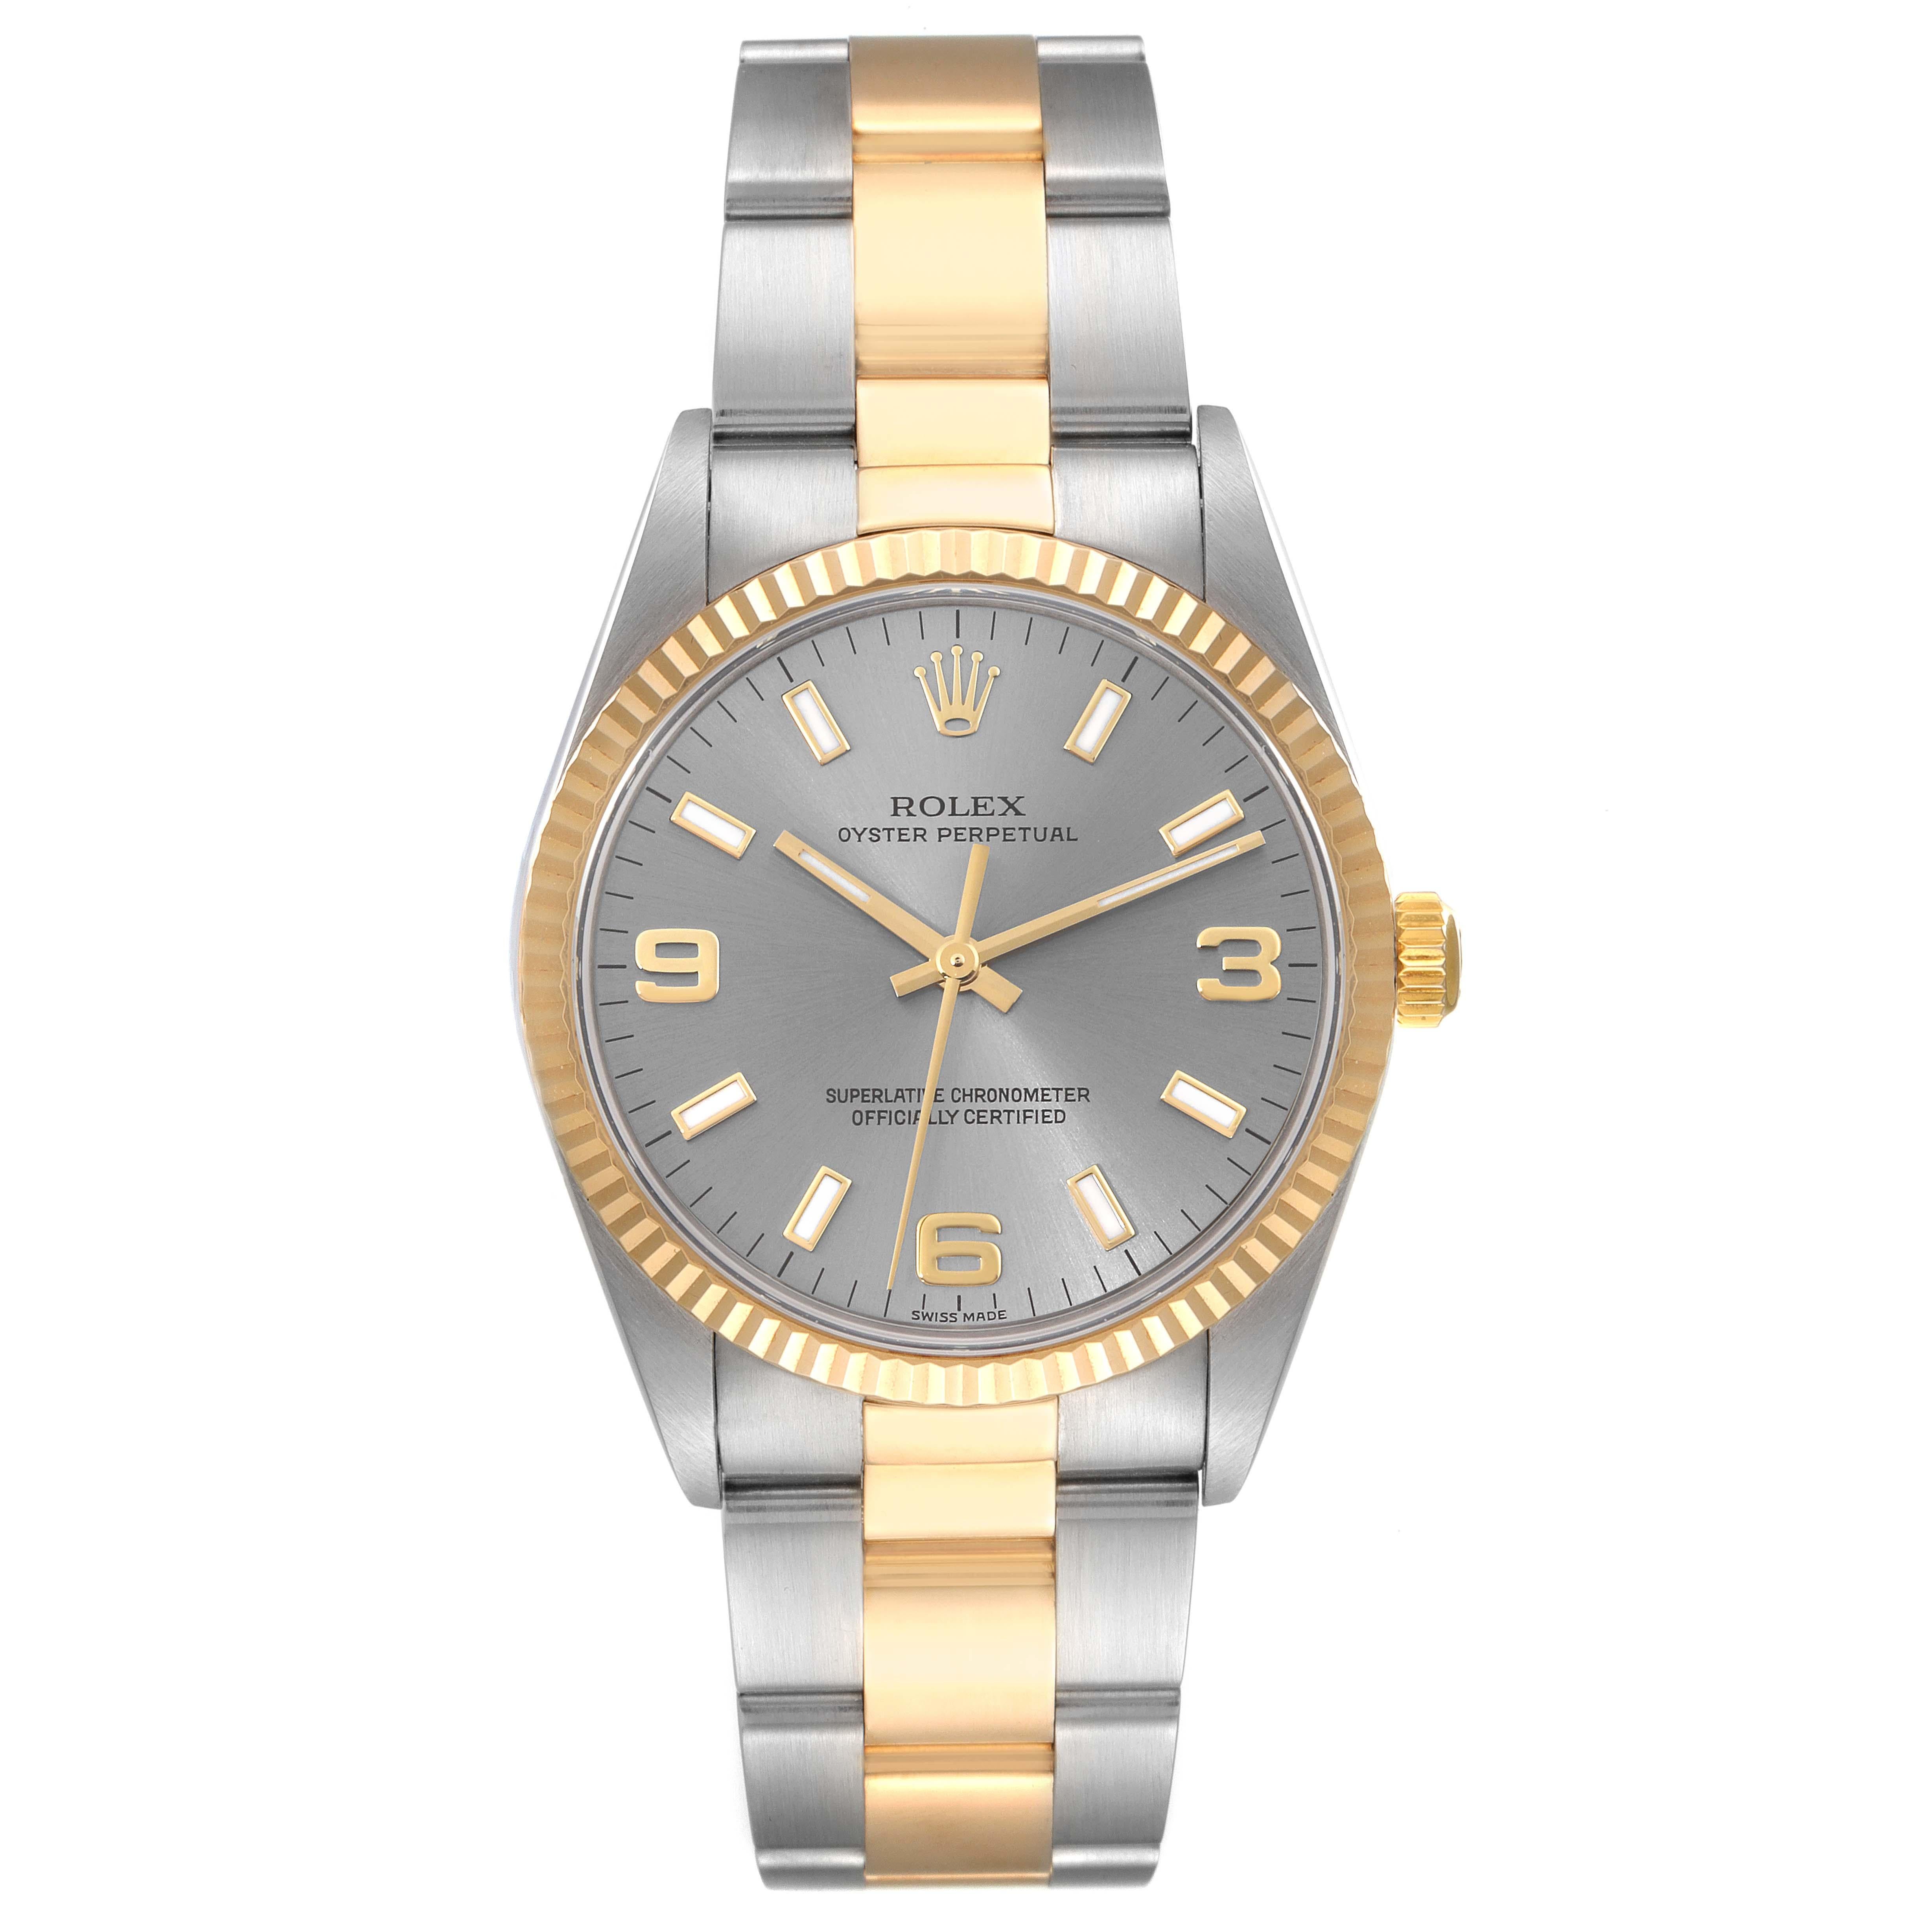 Rolex Oyster Perpetual Steel Yellow Gold Slate Dial Mens Watch 14233. Officially certified chronometer automatic self-winding movement. Stainless steel and 18K yellow gold oyster case 34.0 mm in diameter. Rolex logo on a crown. 18K yellow gold